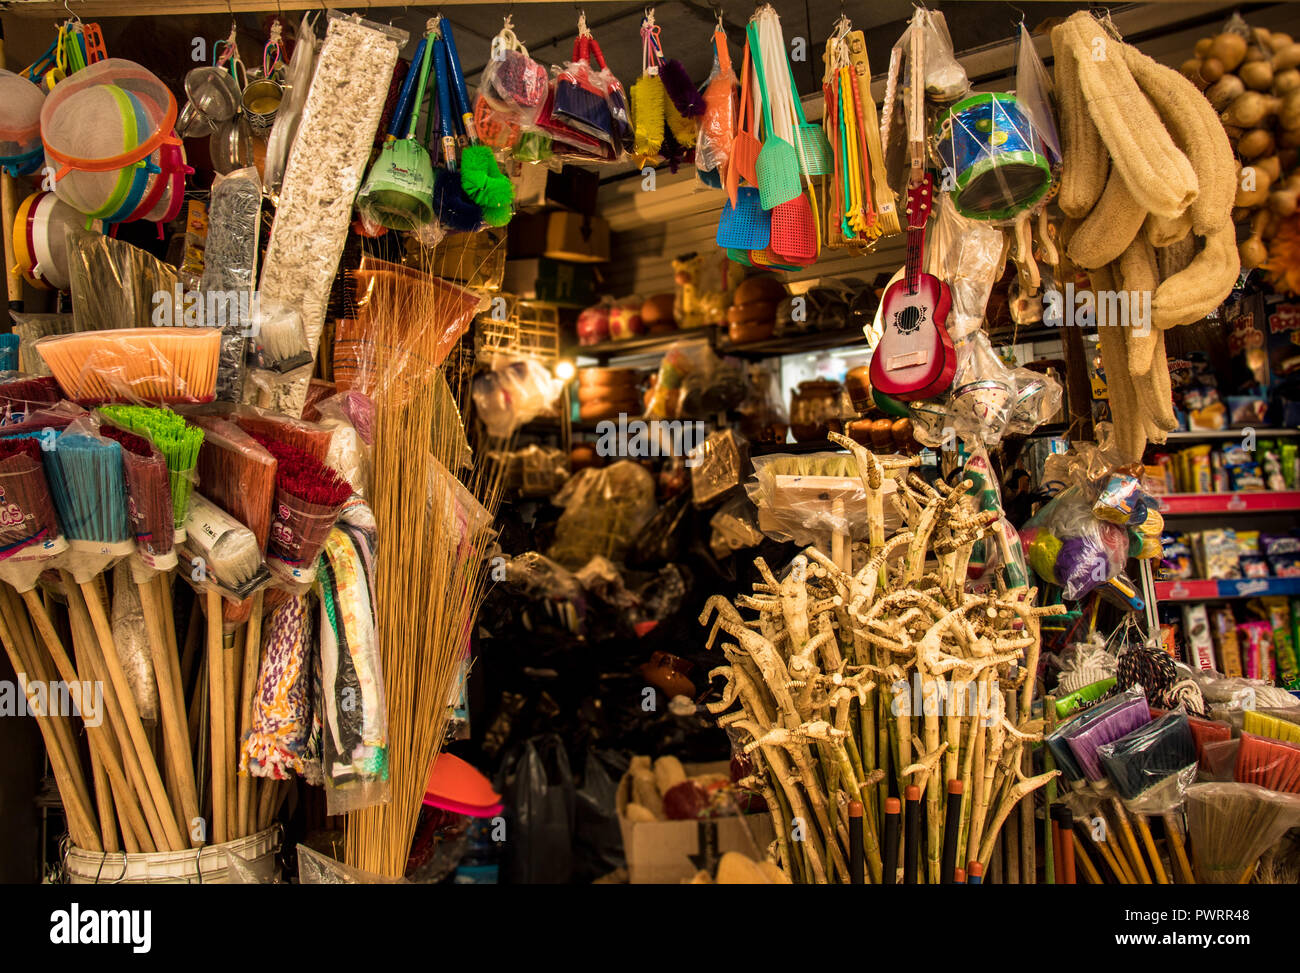 interior of a mexican market, sale of crafts Stock Photo